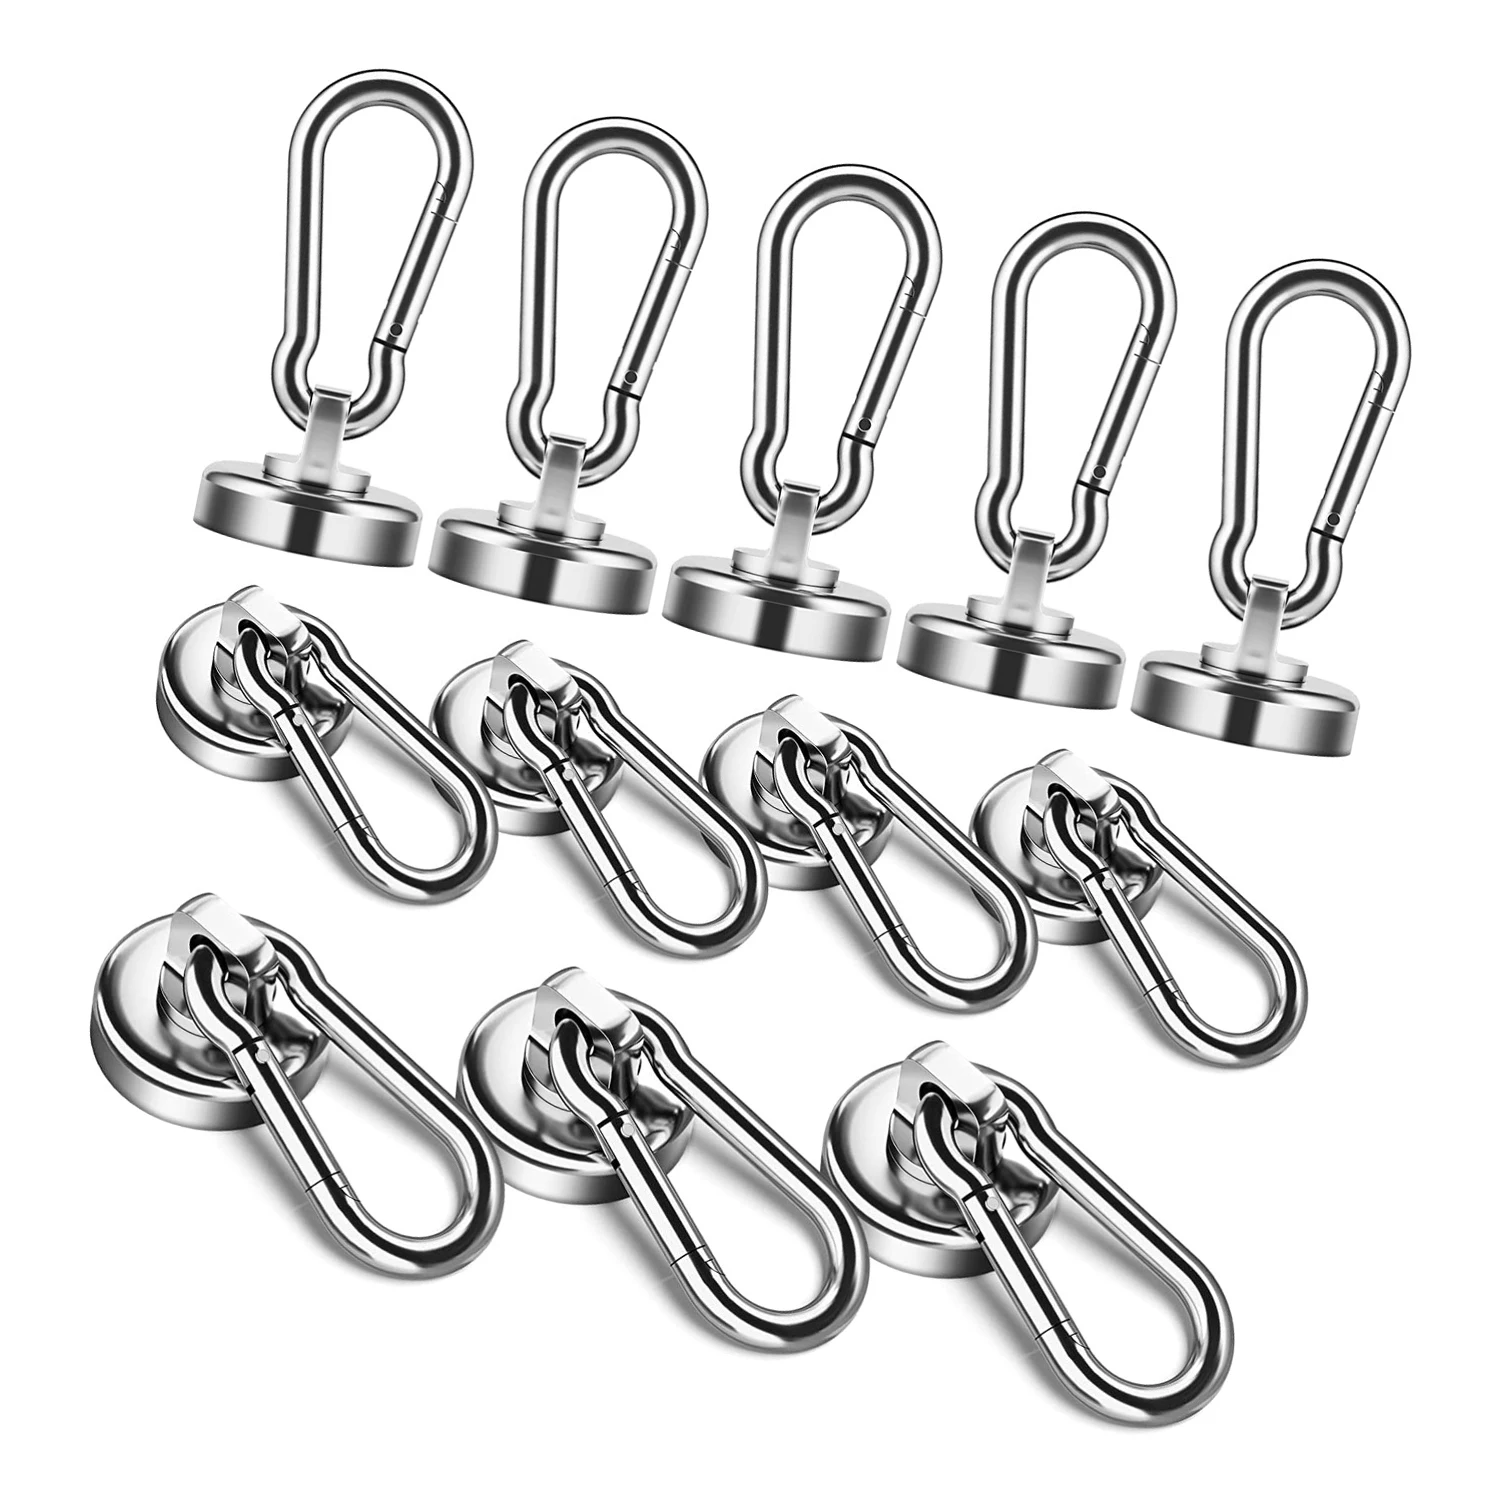 12PC Magnetic Necklace Clasps and Closures. Strong Magnet Clasp for Regular